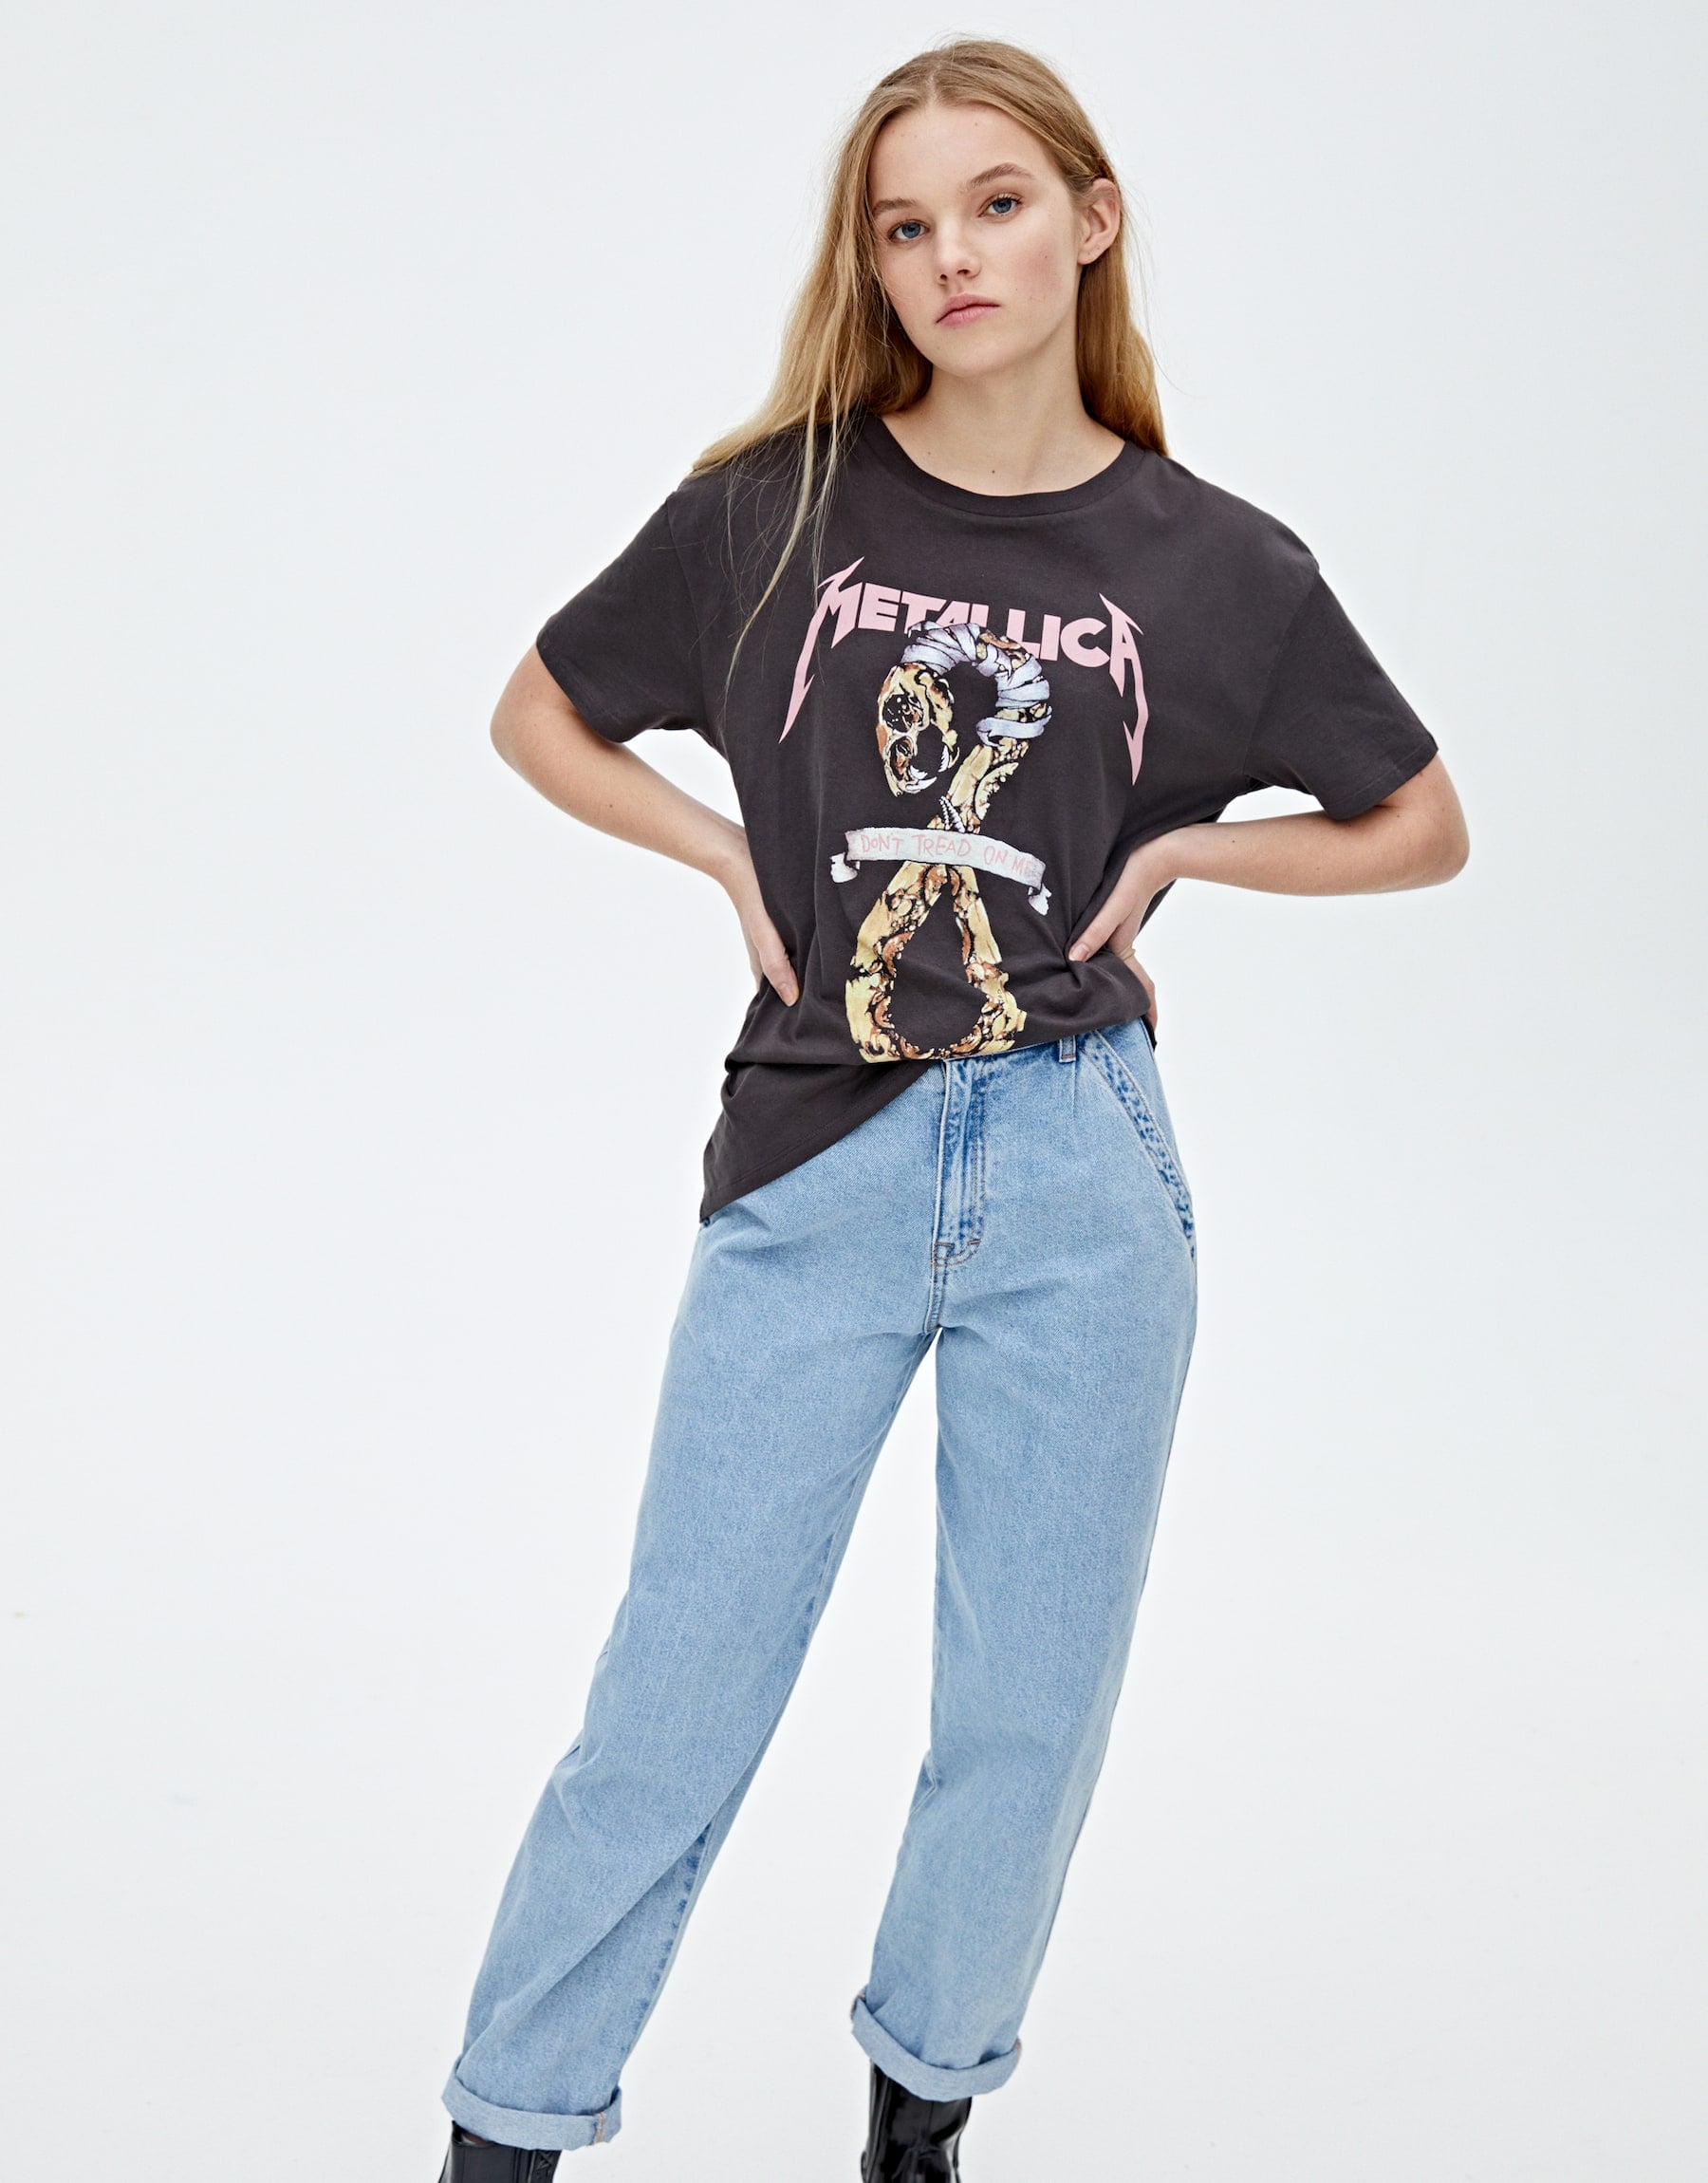 Pull&Bear Metallica Snake T-Shirt | Selena Gomez's Urban Outfitters  Shopping Outfit Takes Us Back to the '90s | POPSUGAR Fashion Photo 5